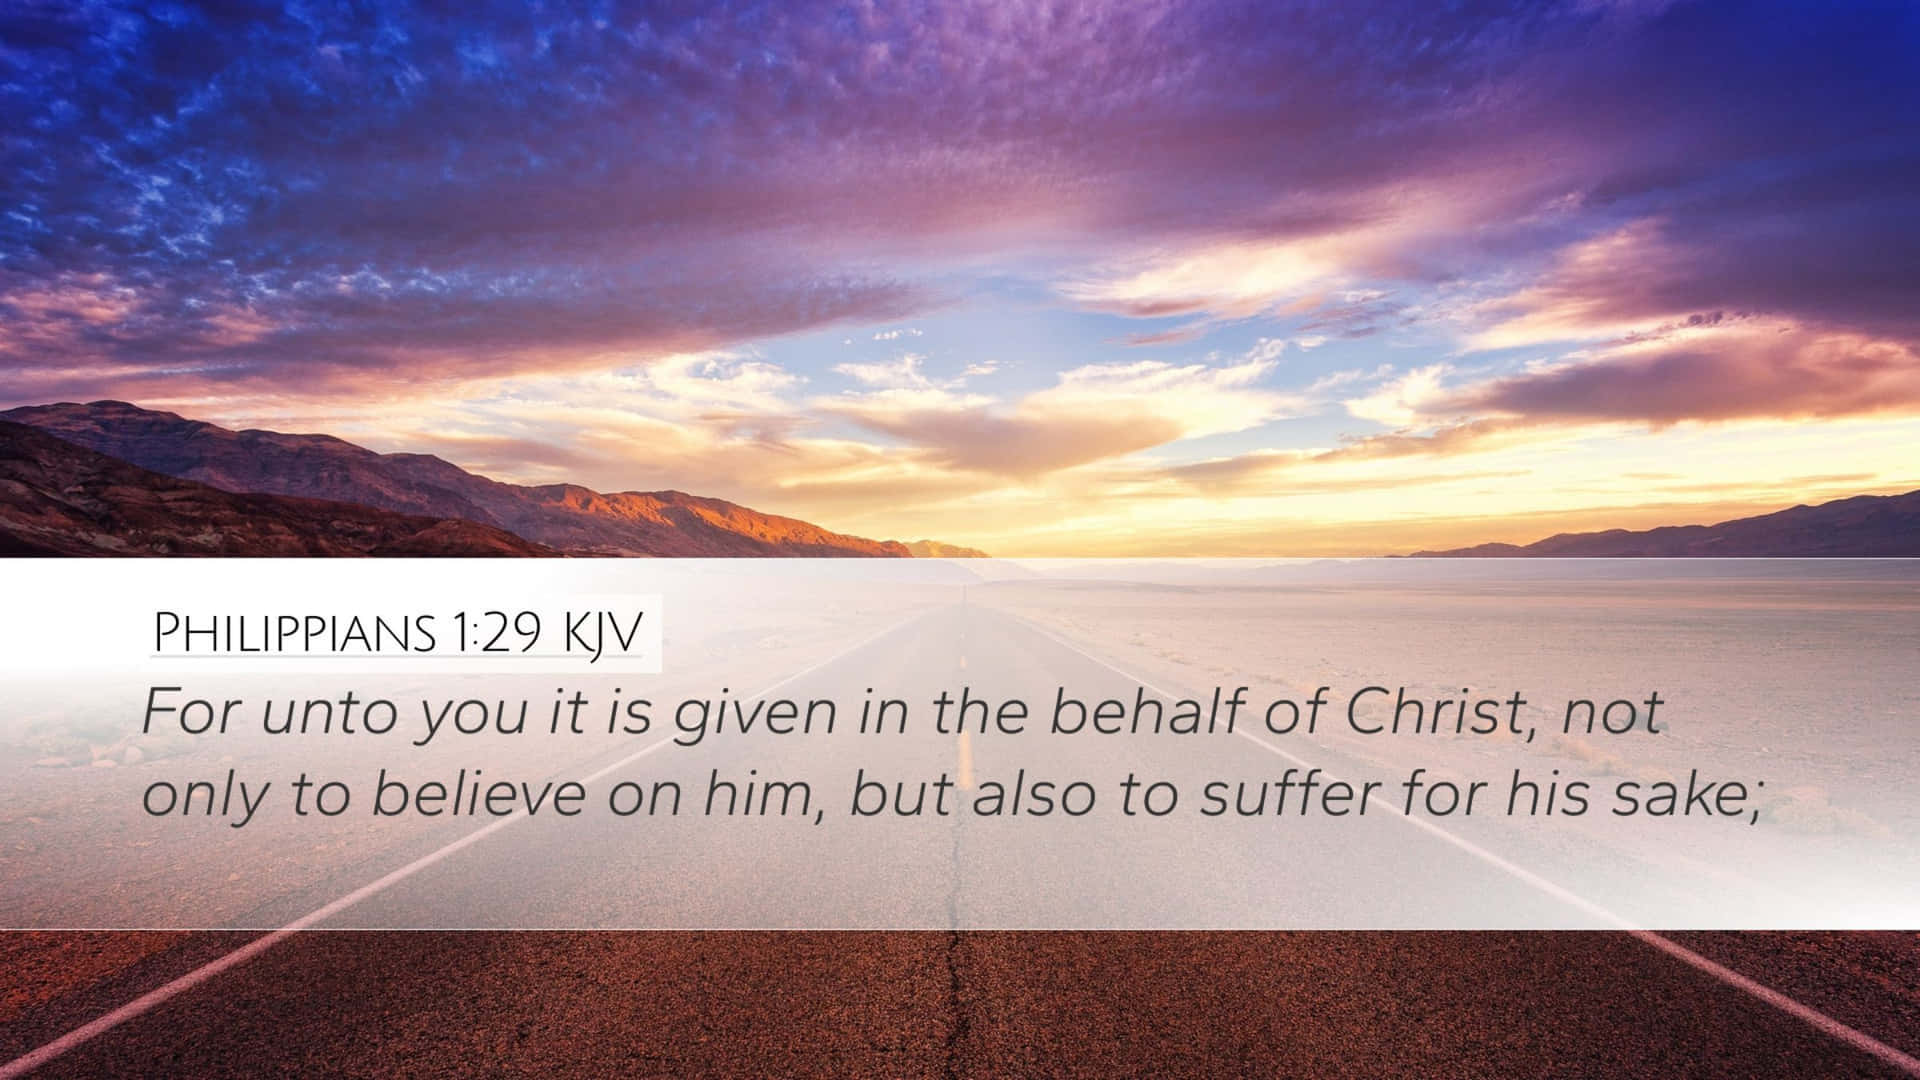 Take a break from your busy life and reflect on God's word with Bible Verse Desktop wallpaper Wallpaper